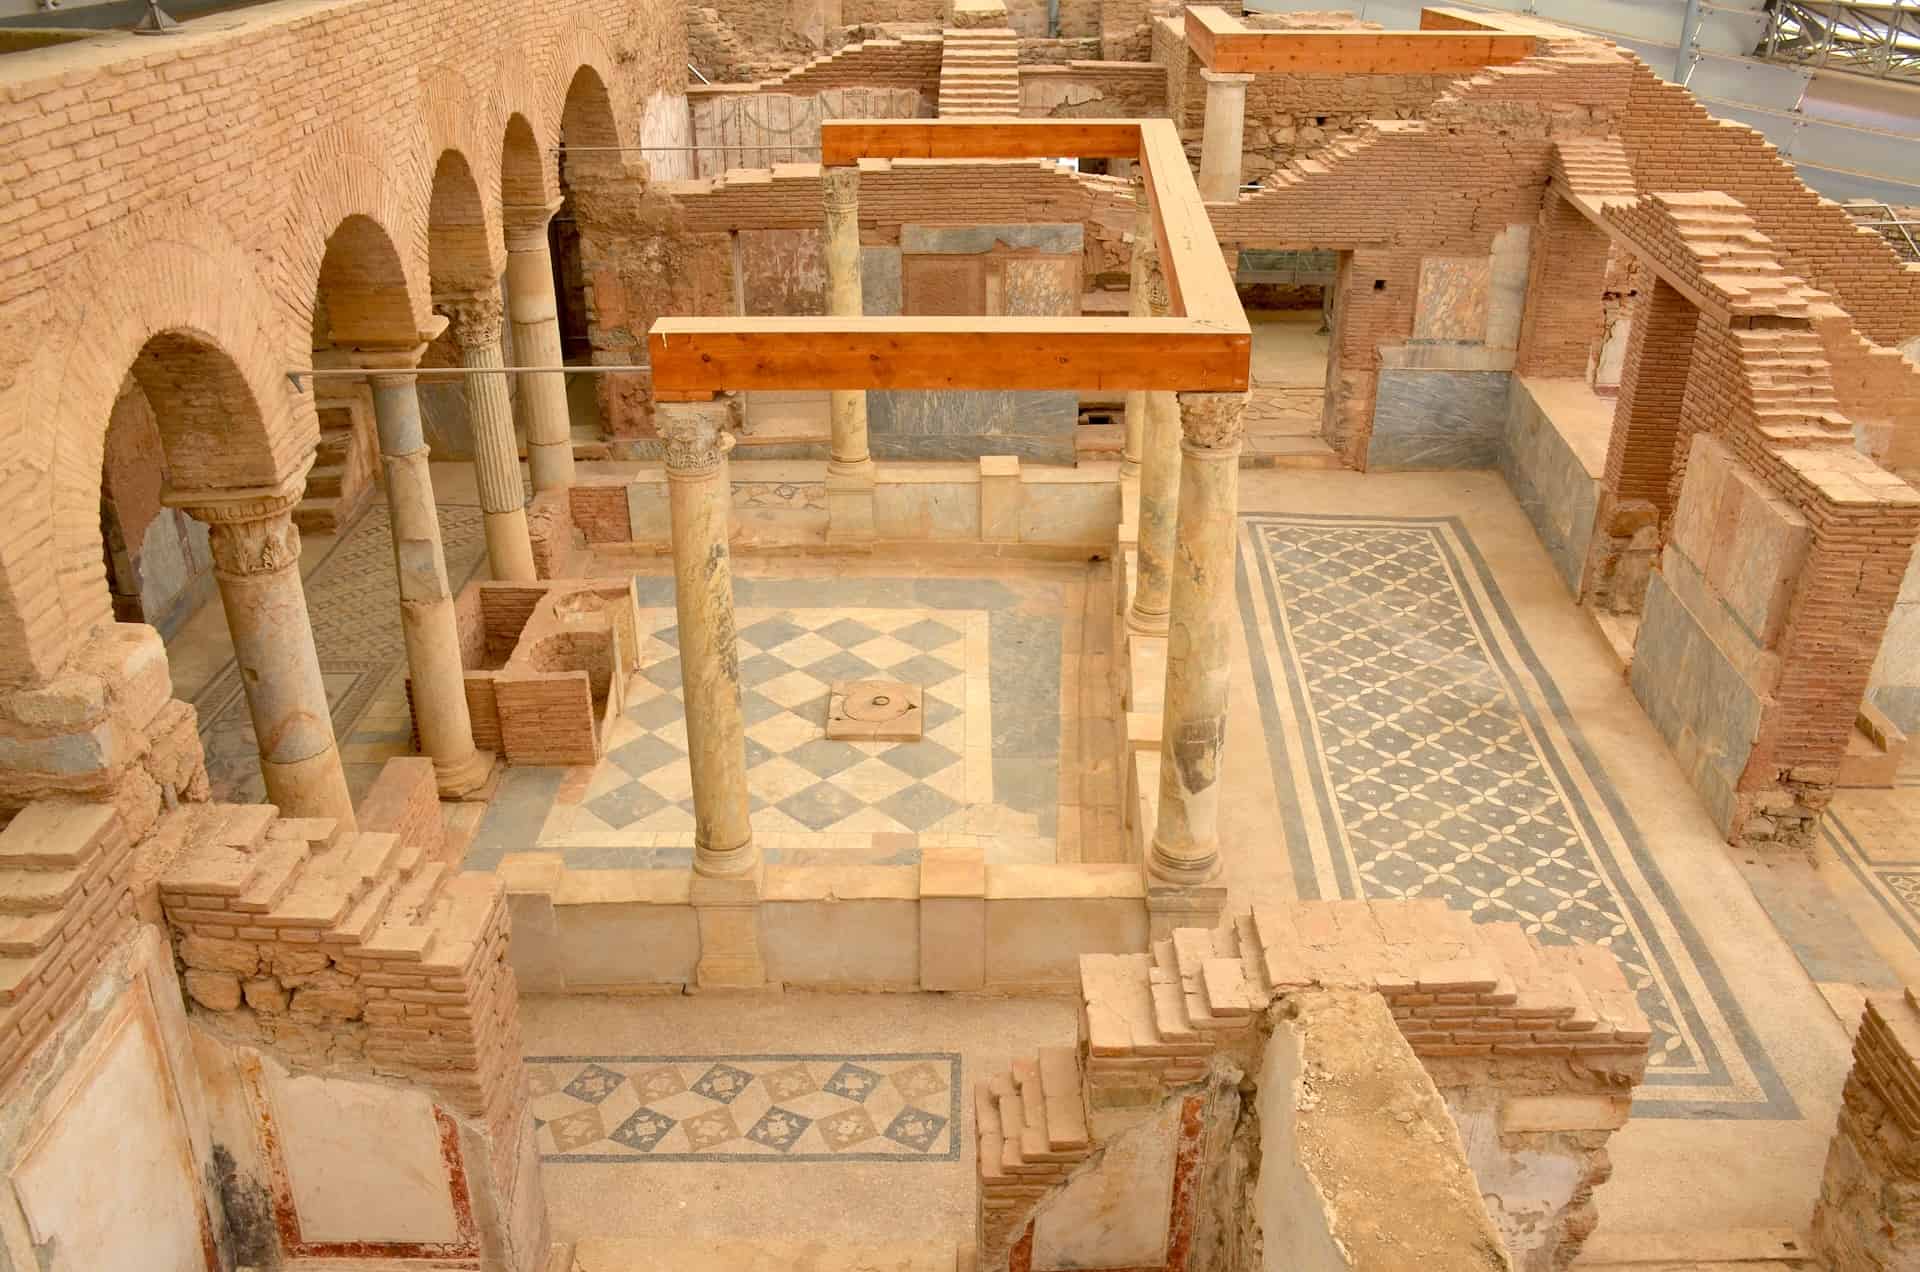 Central peristyle courtyard of Dwelling Unit 2 in the Terrace Houses at Ephesus